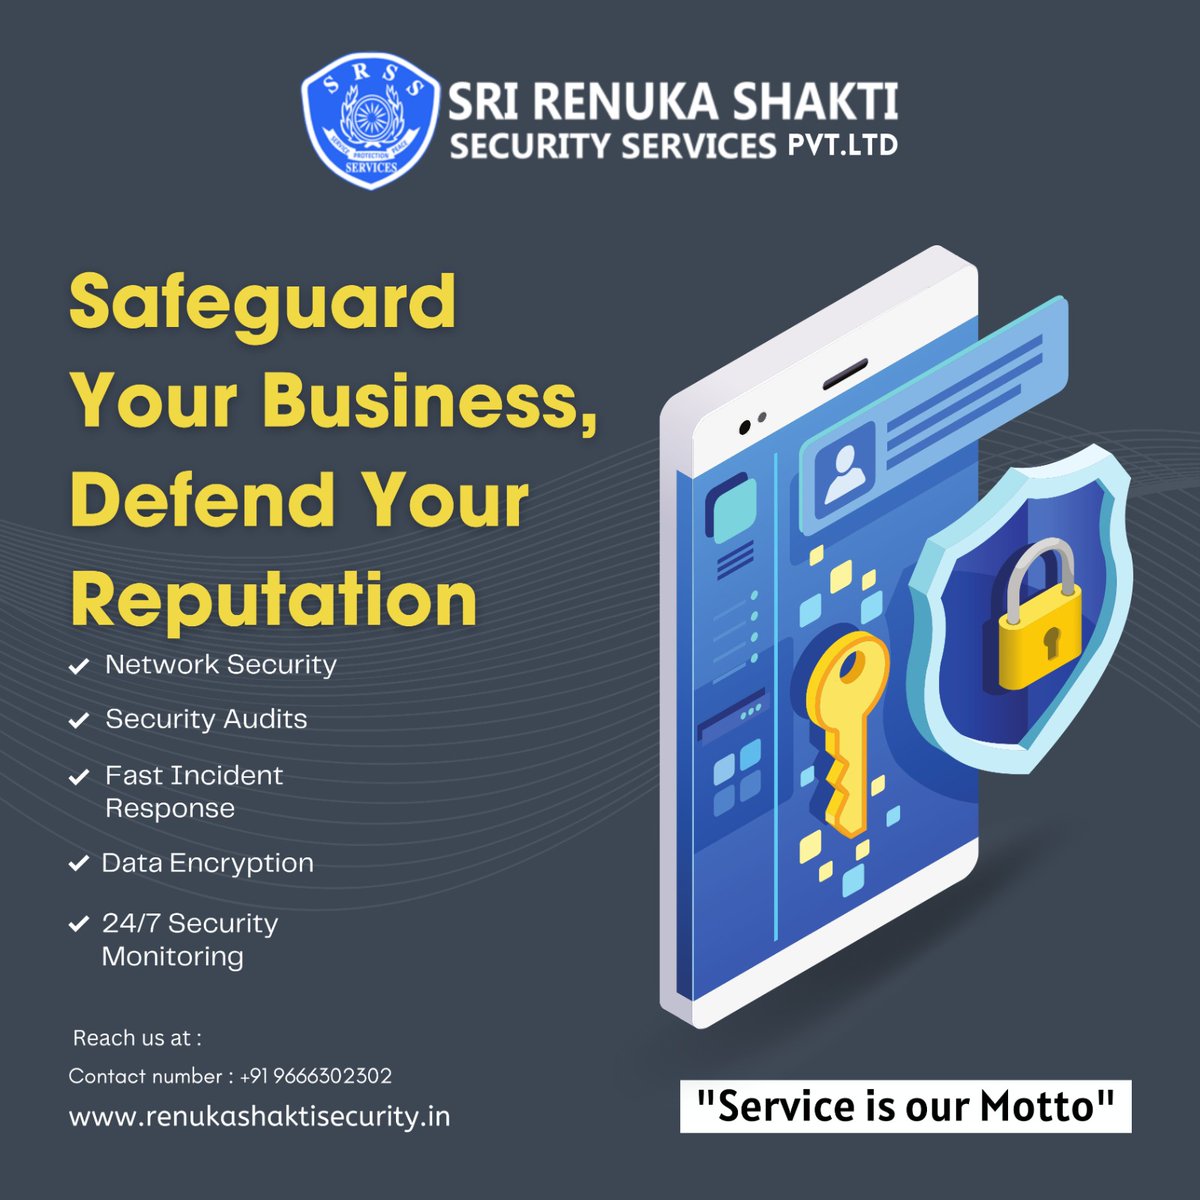 At Sri Renuka Security Services, we employ a team of highly trained and experienced security professionals. #SriRenukaShaktiSecurity #Securityguards #SecurityServices #ExpertiseInSafety #DedicationToProtection #YourSafetyMatters #PeaceOfMind #SafeguardingYou #recomended